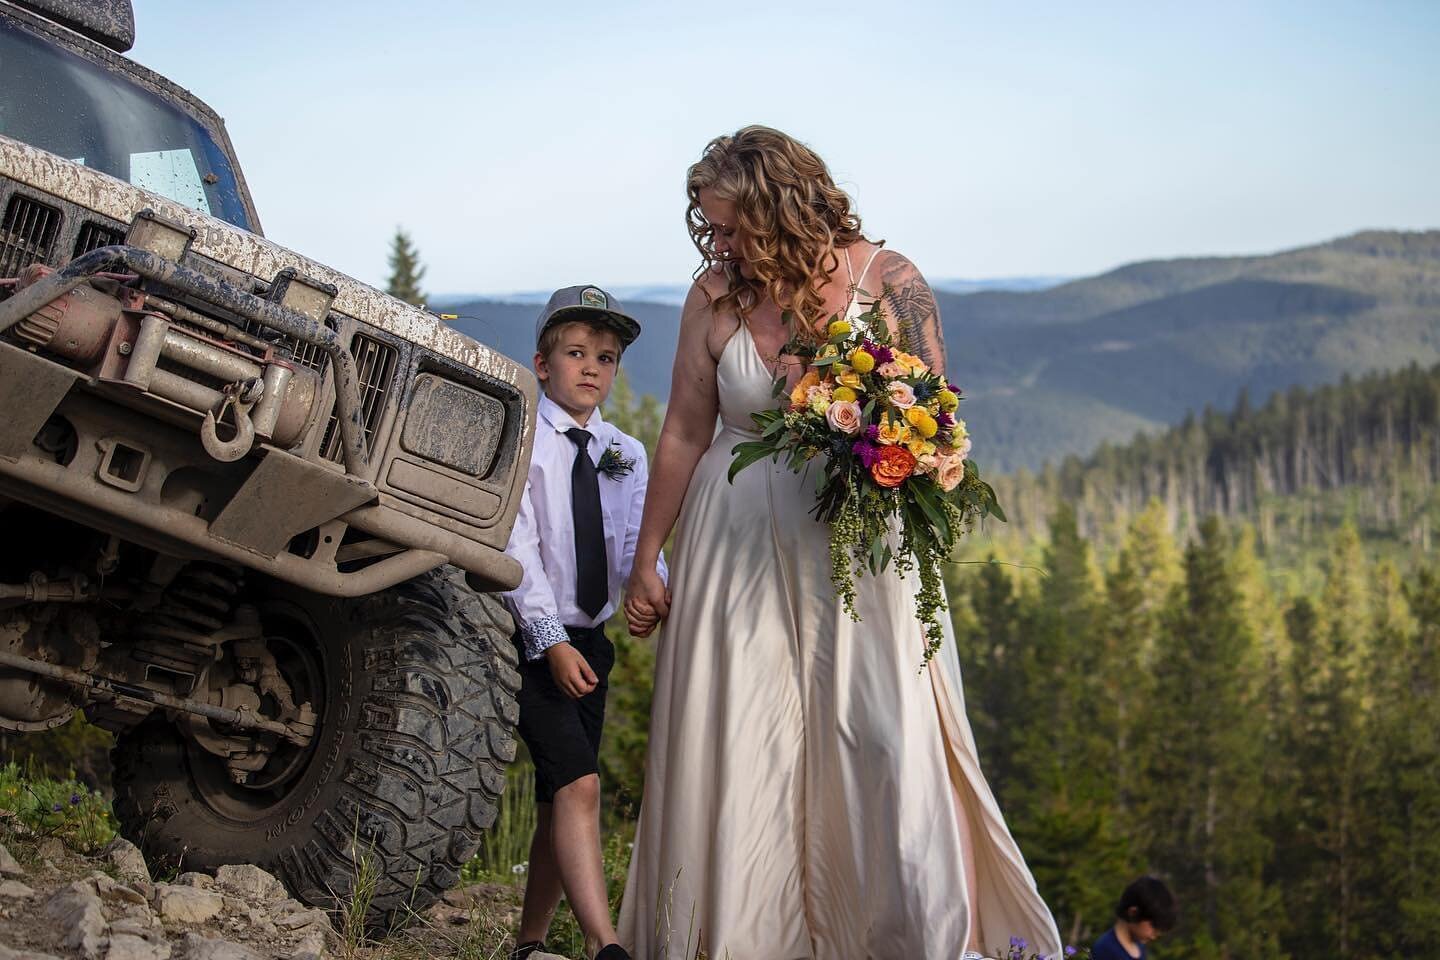 You know what&rsquo;s weird? Posting my own wedding photos. Super weird. 

Huge thank you to @mountainsandmemories.ca for this beautiful candid shot of me and my little man.

We had the most amazing 10 days of camping and Jeeping at Mclean Creek topp